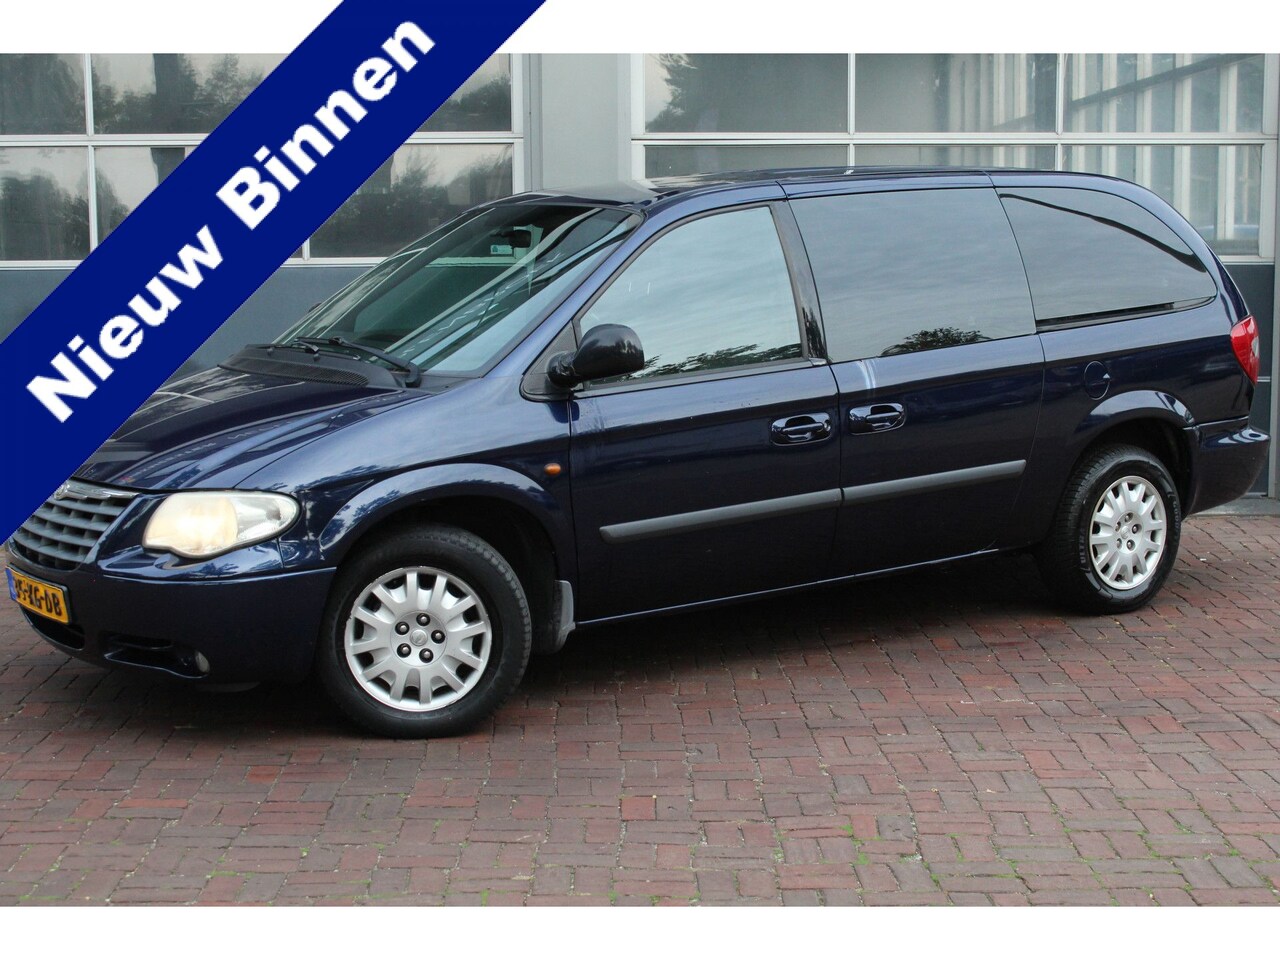 Chrysler Grand Voyager - 3.3i V6 SE Luxe | Youngtimer | Airco | 7 personen | APK 07-2023 - AutoWereld.nl